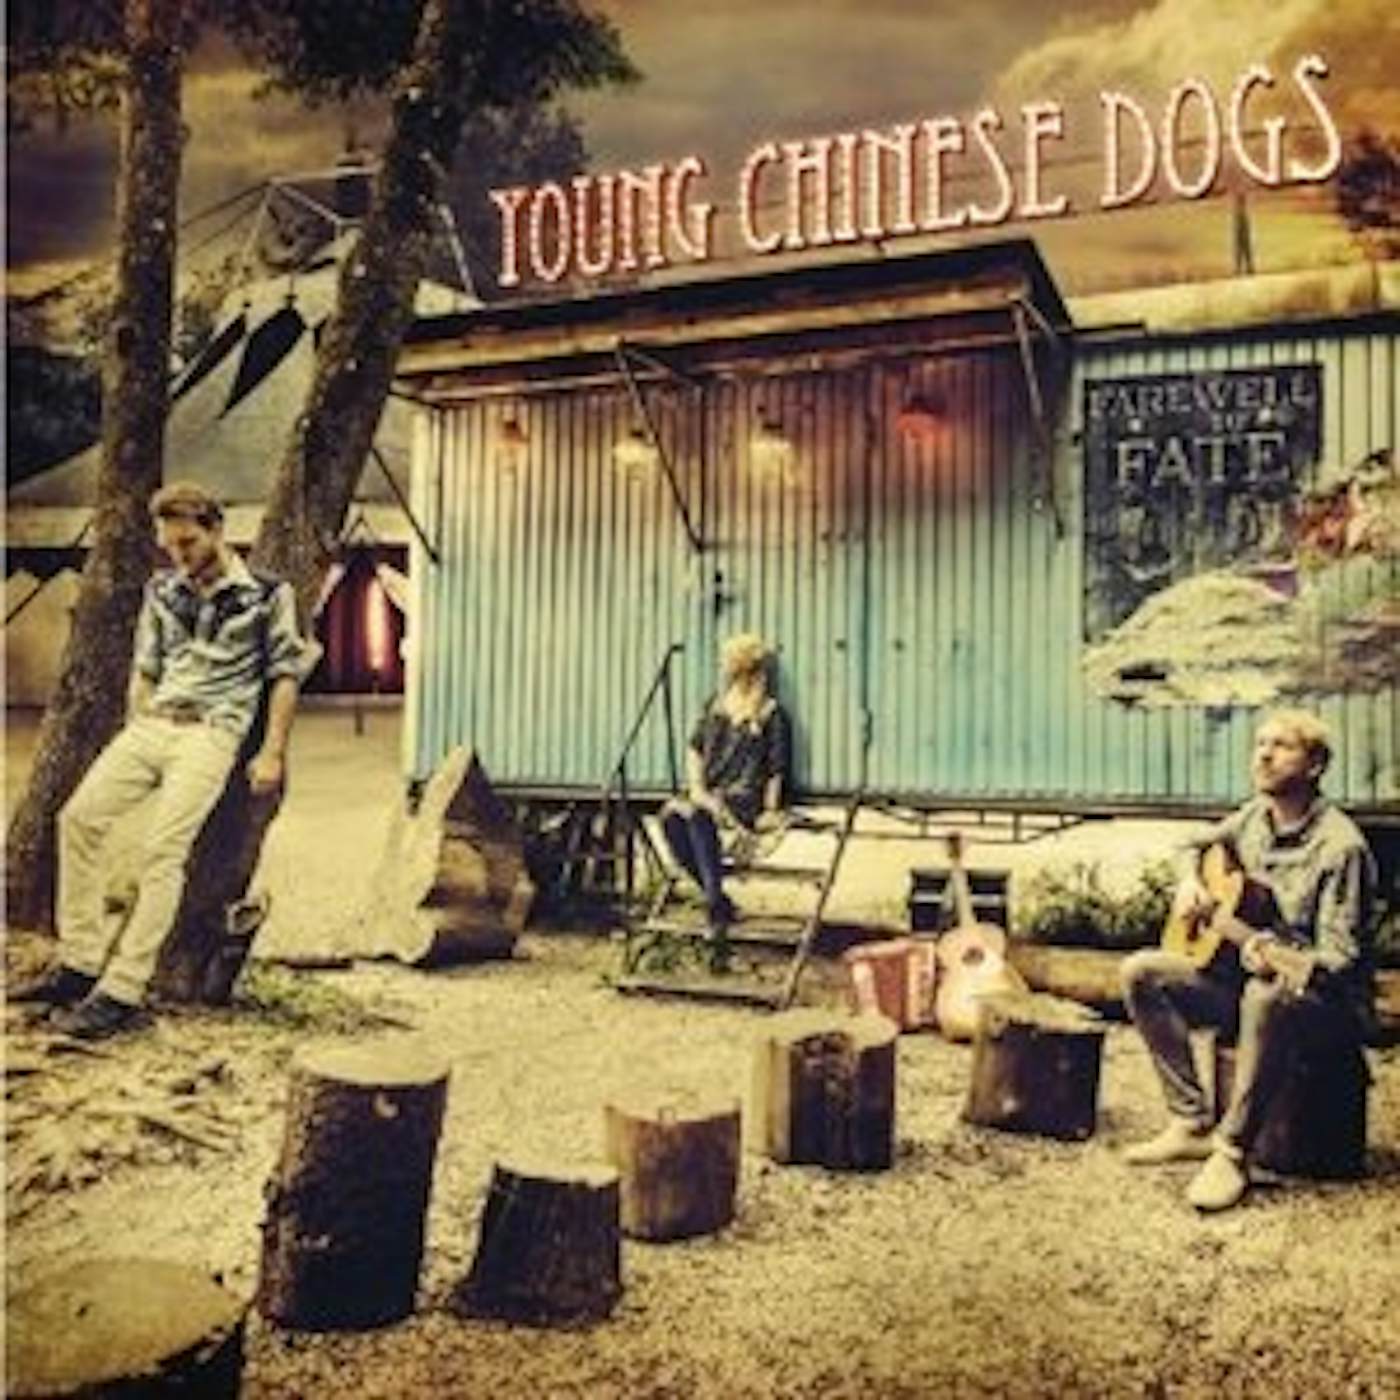 Young Chinese Dogs Farewell to Fate Vinyl Record